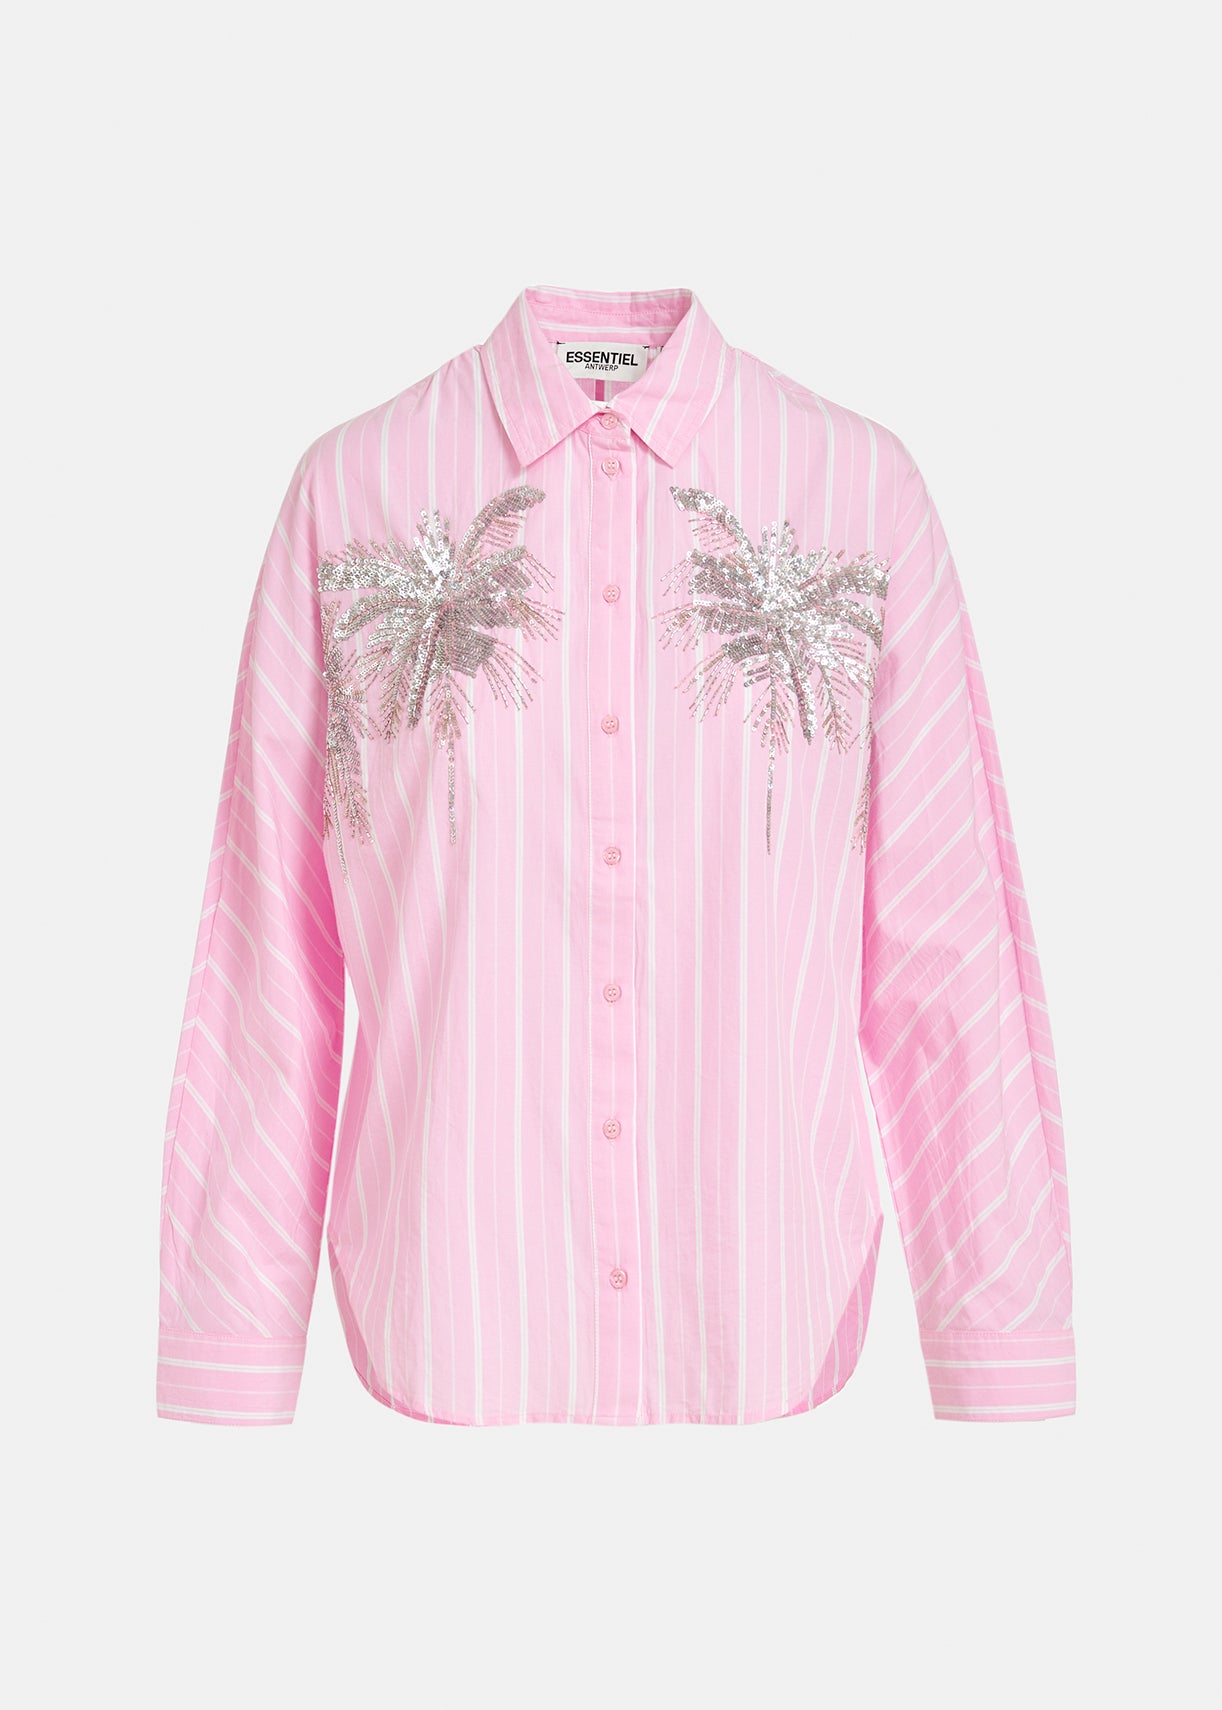 Fresh Shirt - Pink by Essentiel Antwerp with decorative sequin detail on the chest.